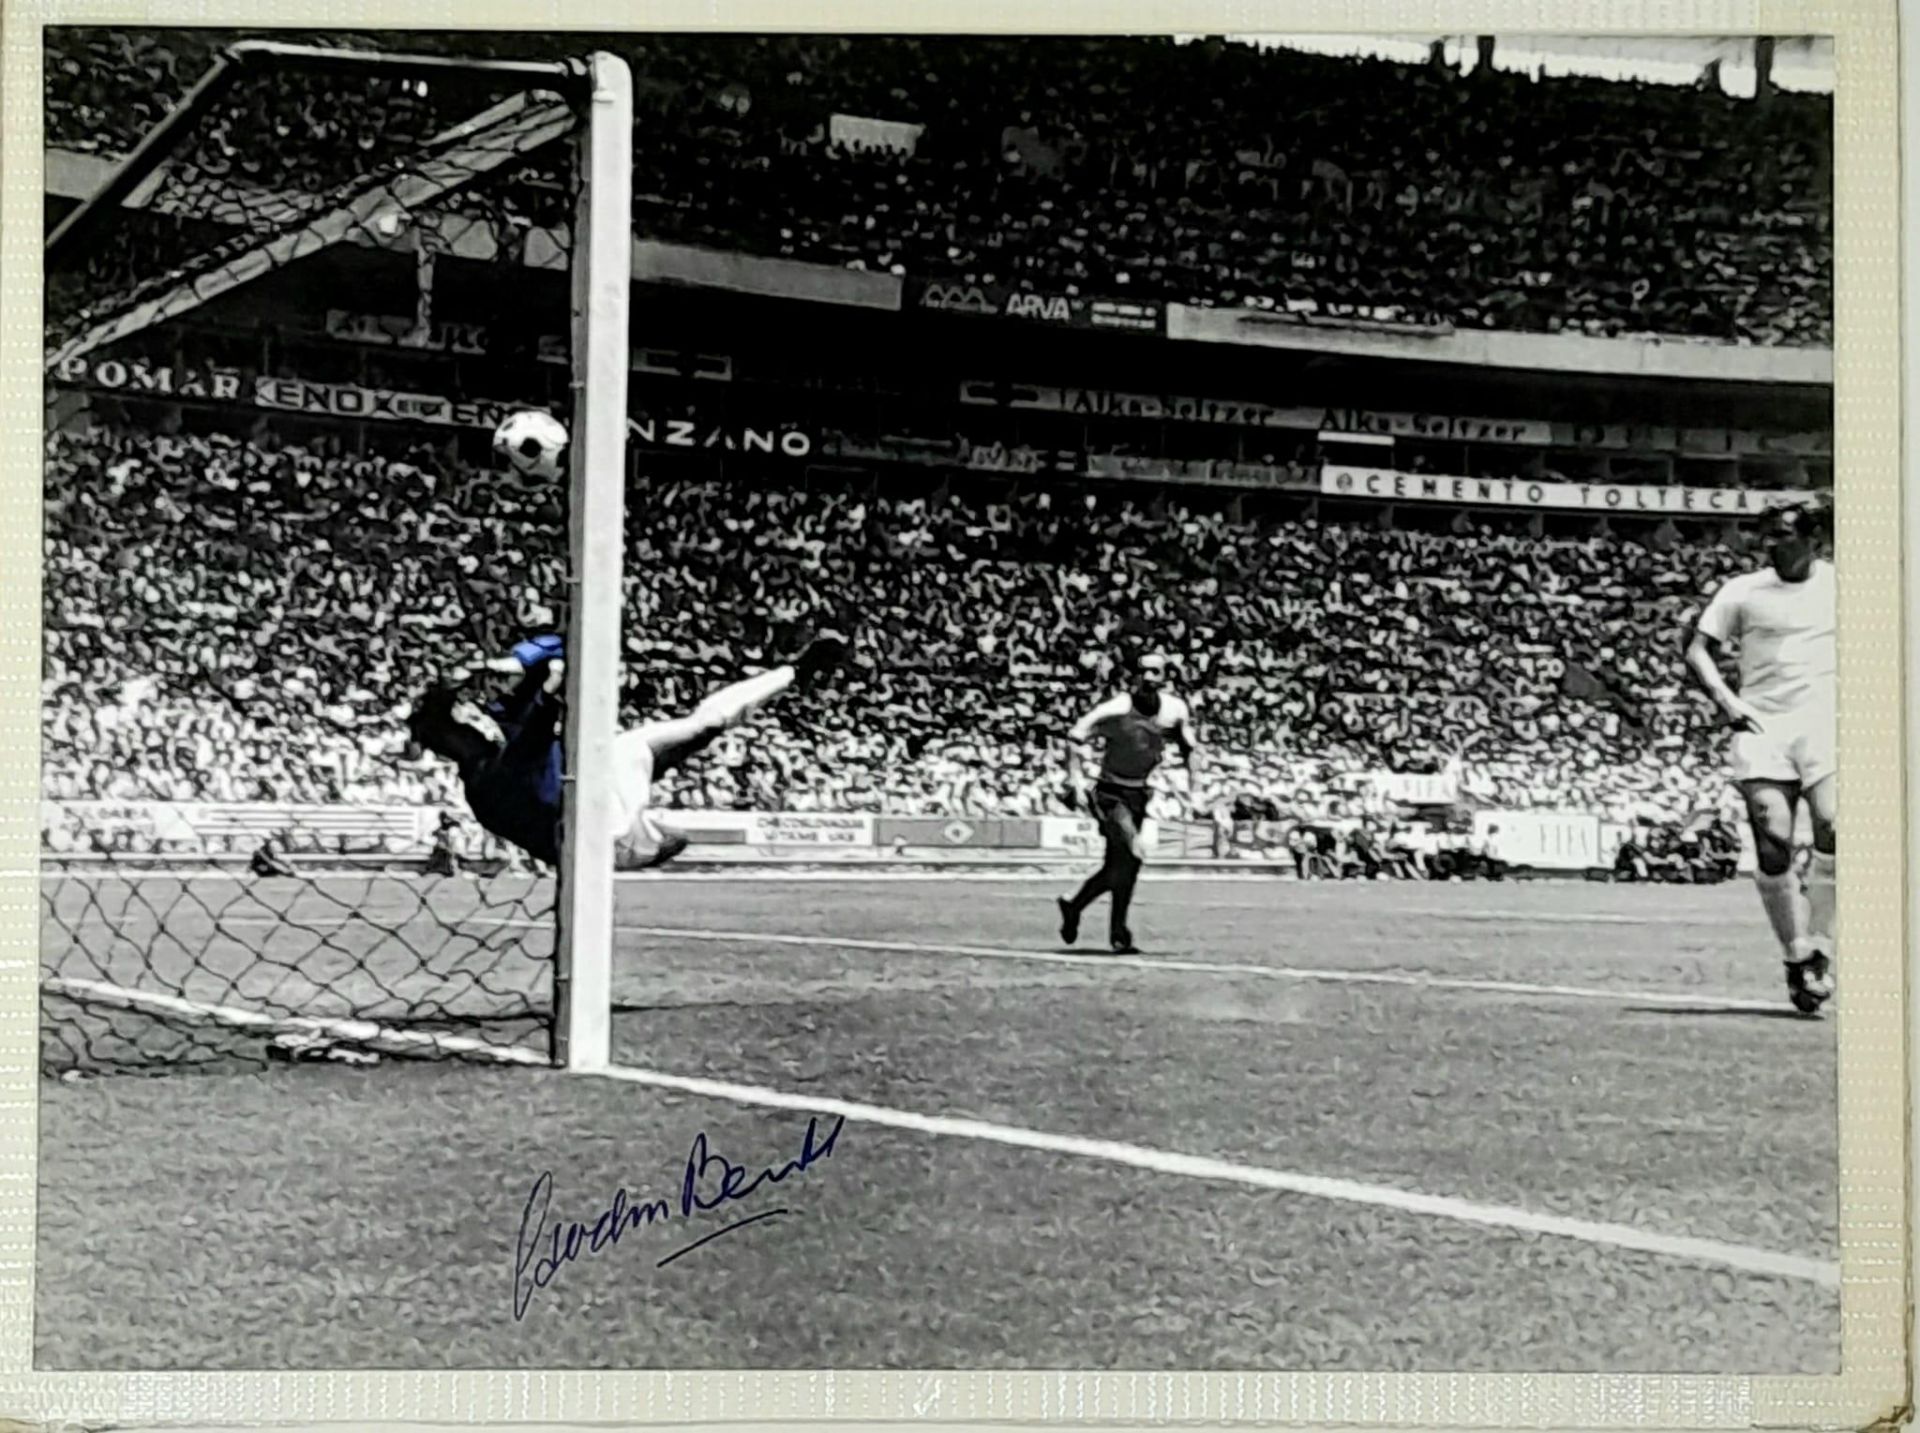 A Gordon Banks 'Save of the Century' Autographed Picture. In a 1970 World cup group match, England